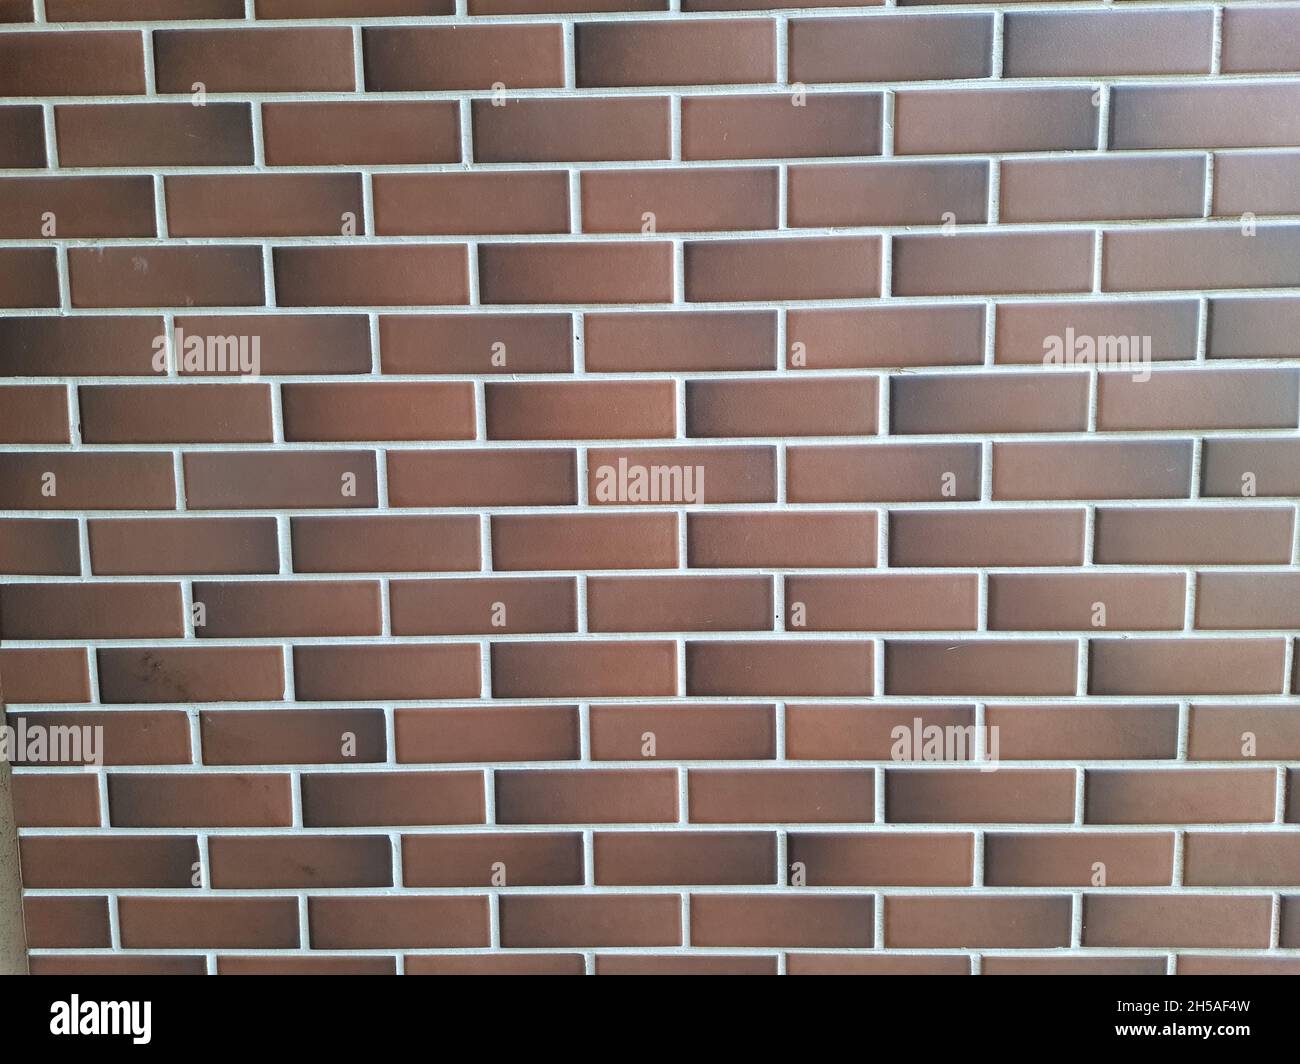 Seamless vintage style design on cream beige yellow brown brick wall ,background texture. Full screen. Stock Photo